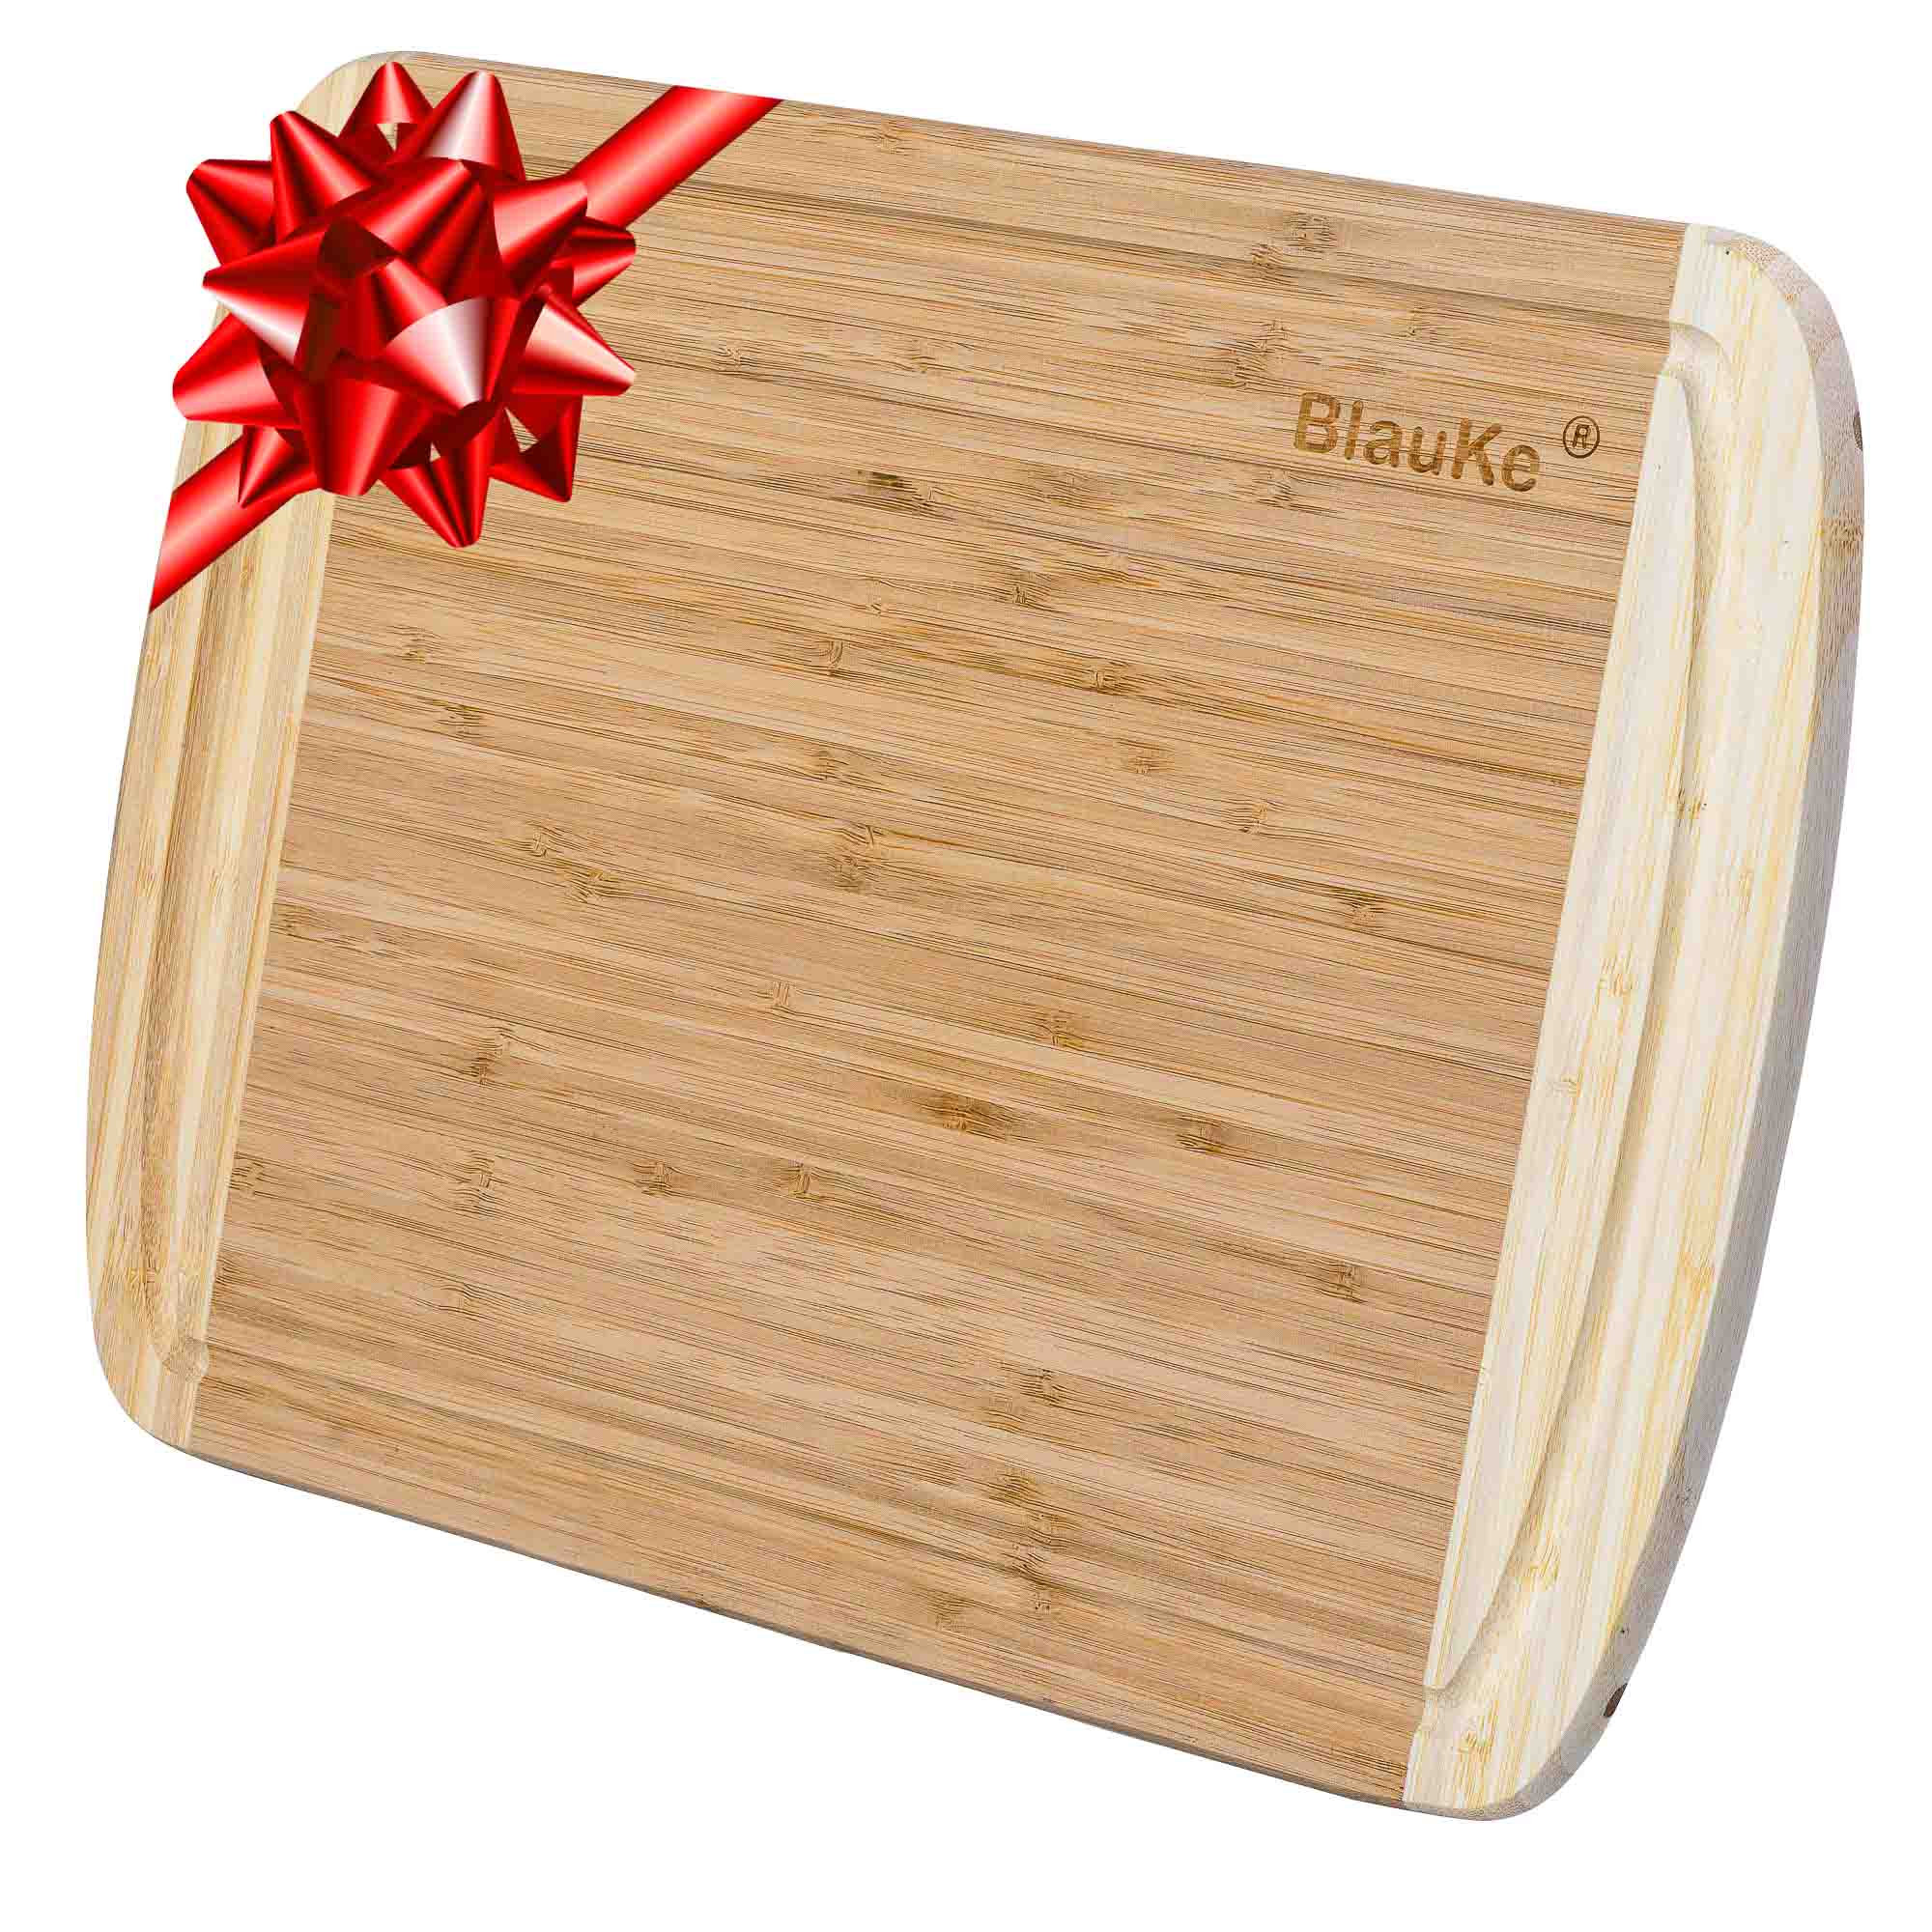 Large Wood Cutting Board for Kitchen 14x11 inch